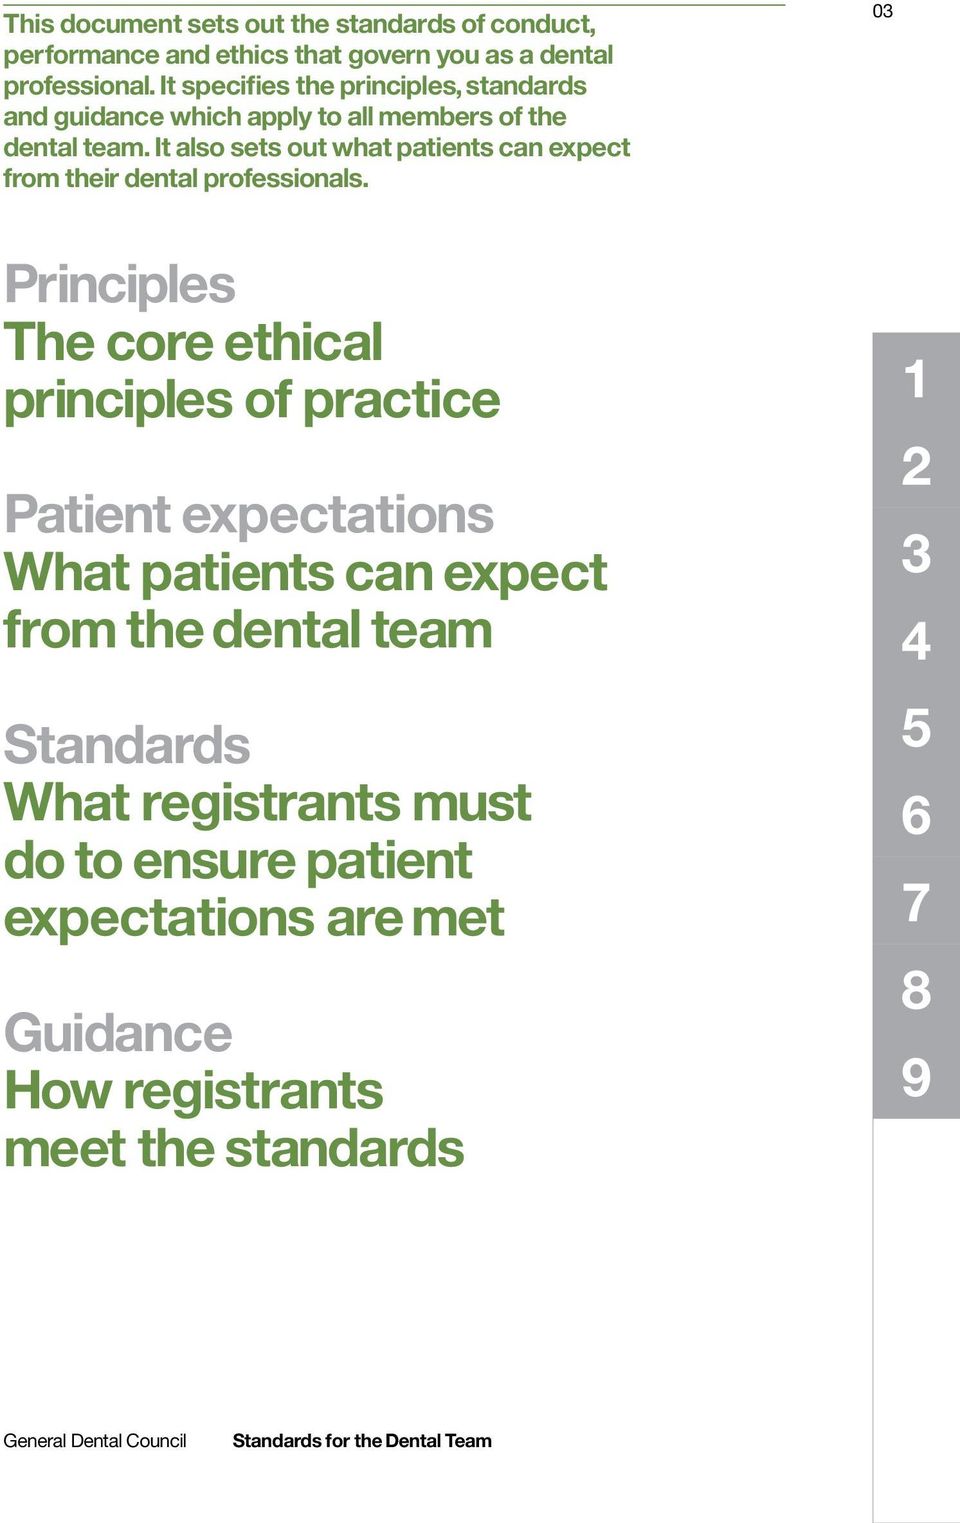 It also sets out what patients can expect from their dental professionals.